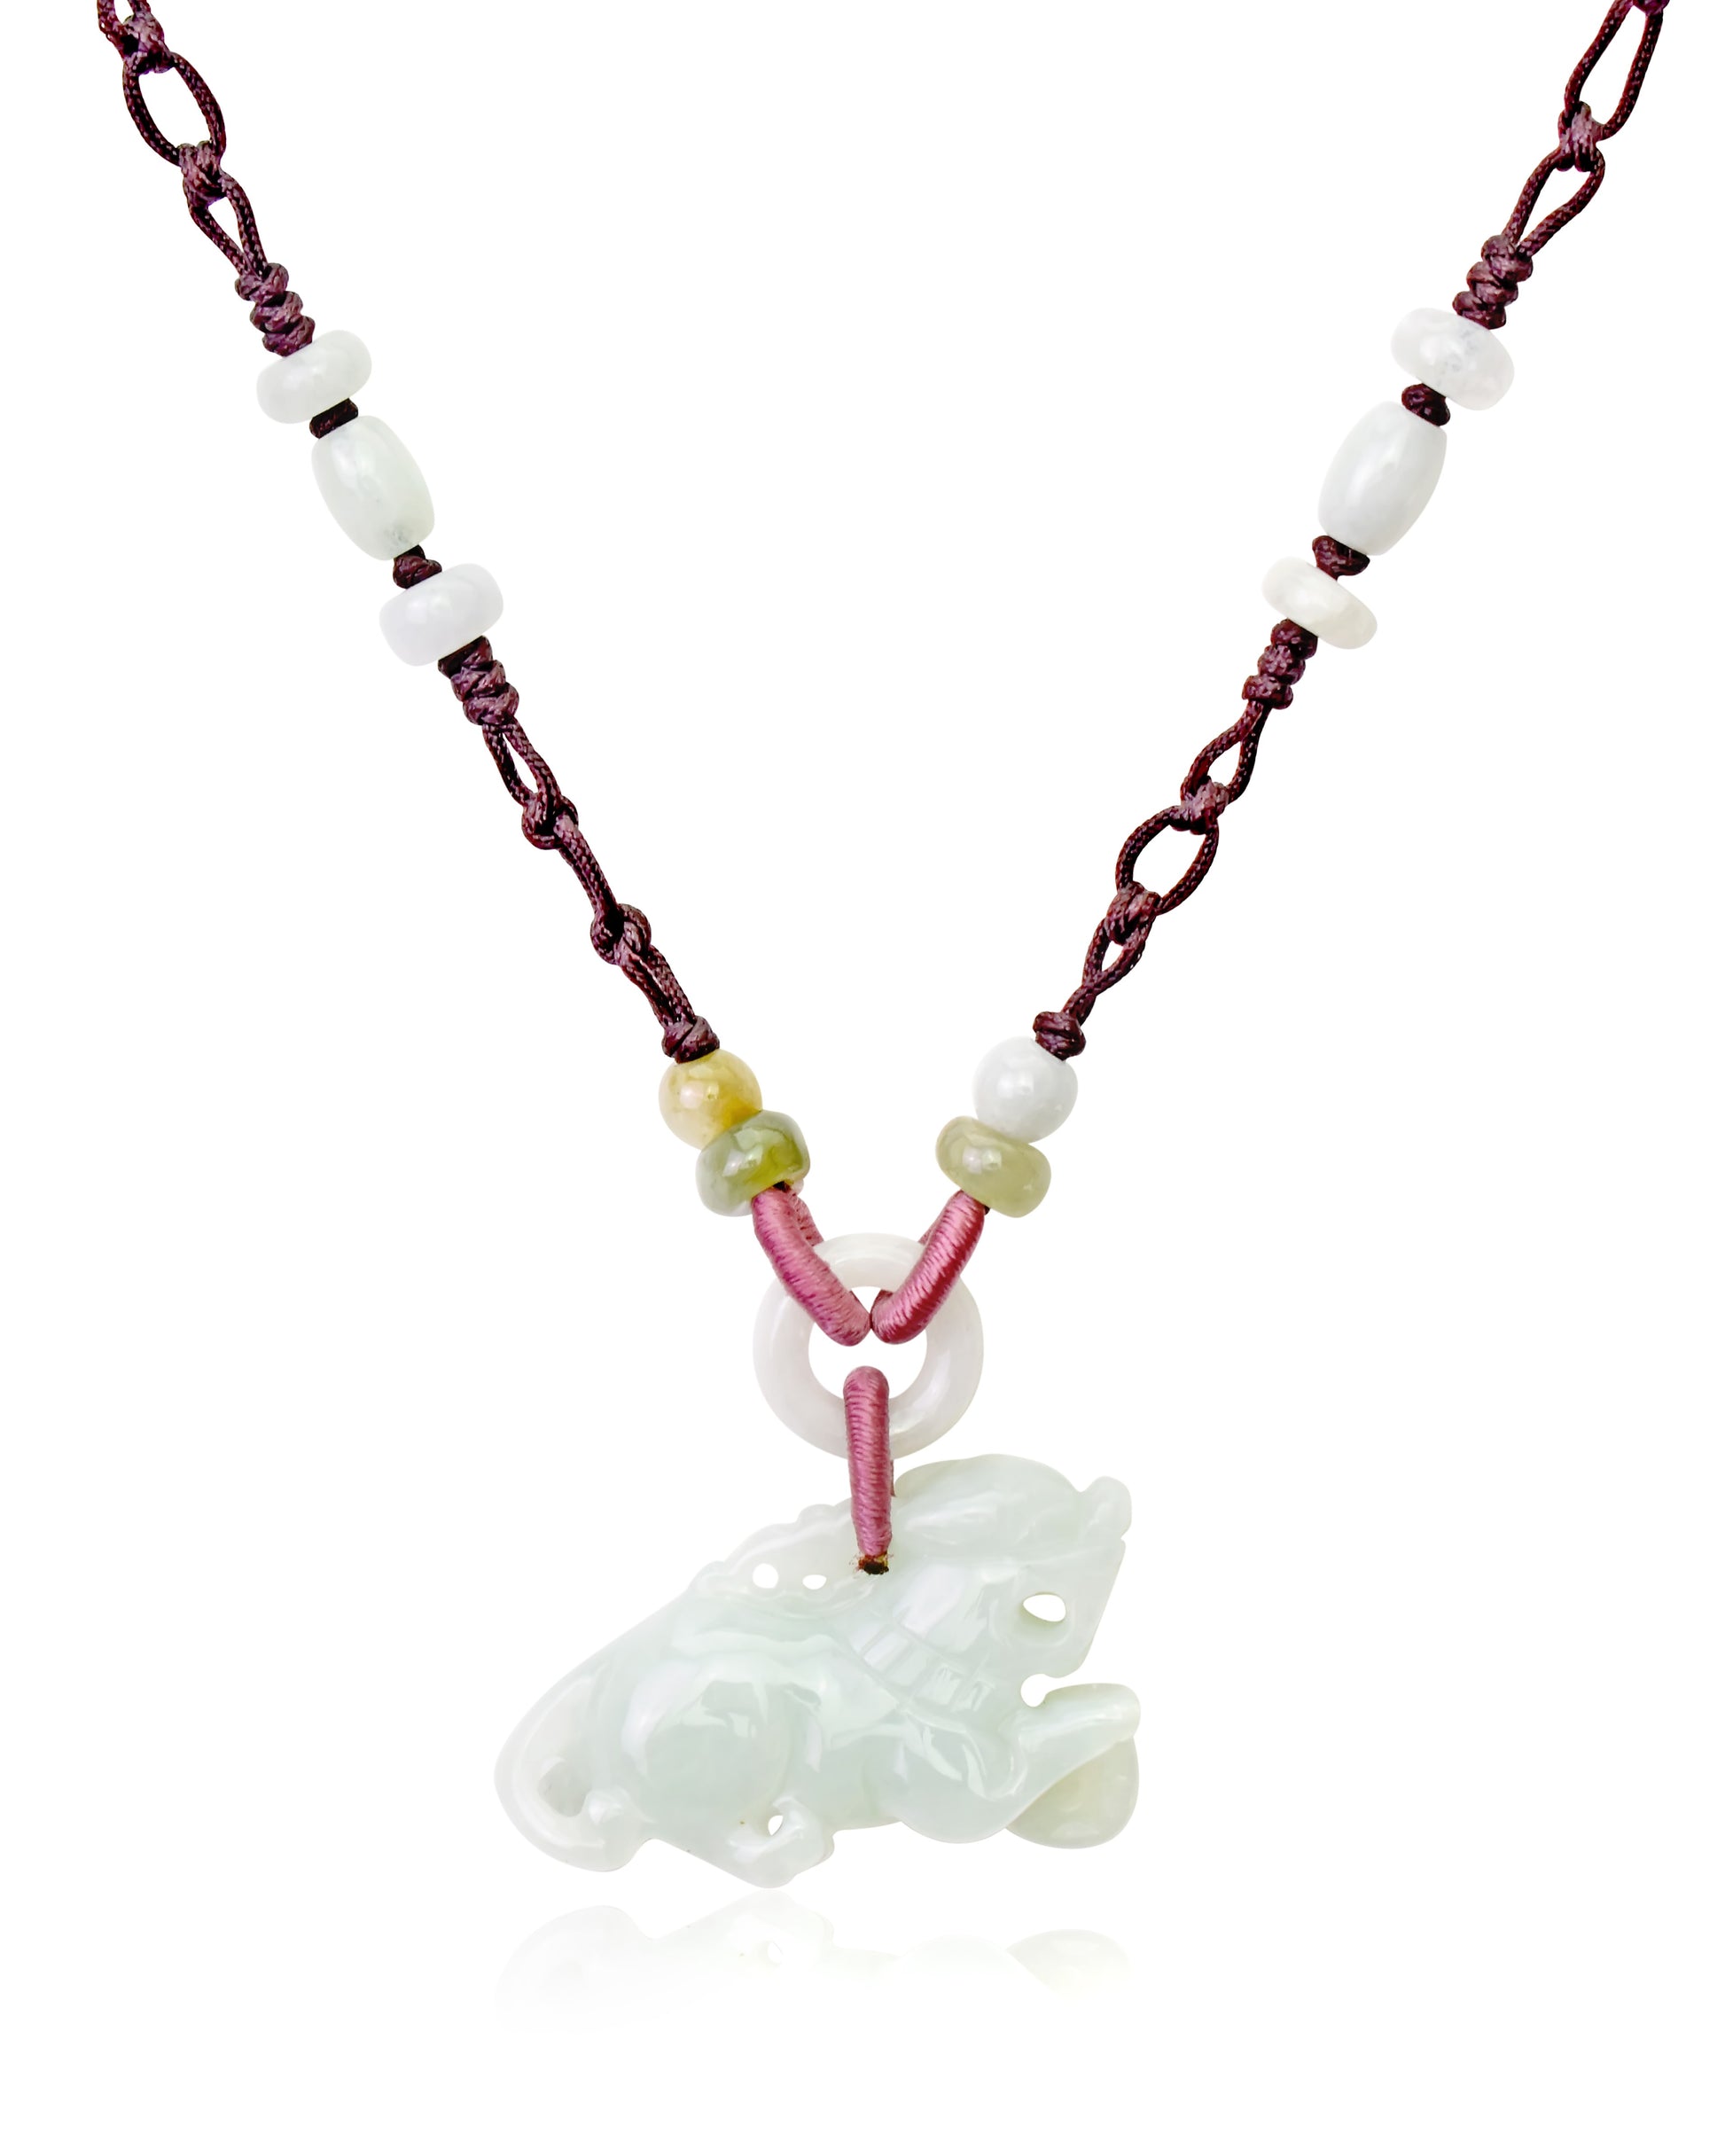 Unleash Your Inner Lion with a Handmade Jade Pendant made with Brown Cord